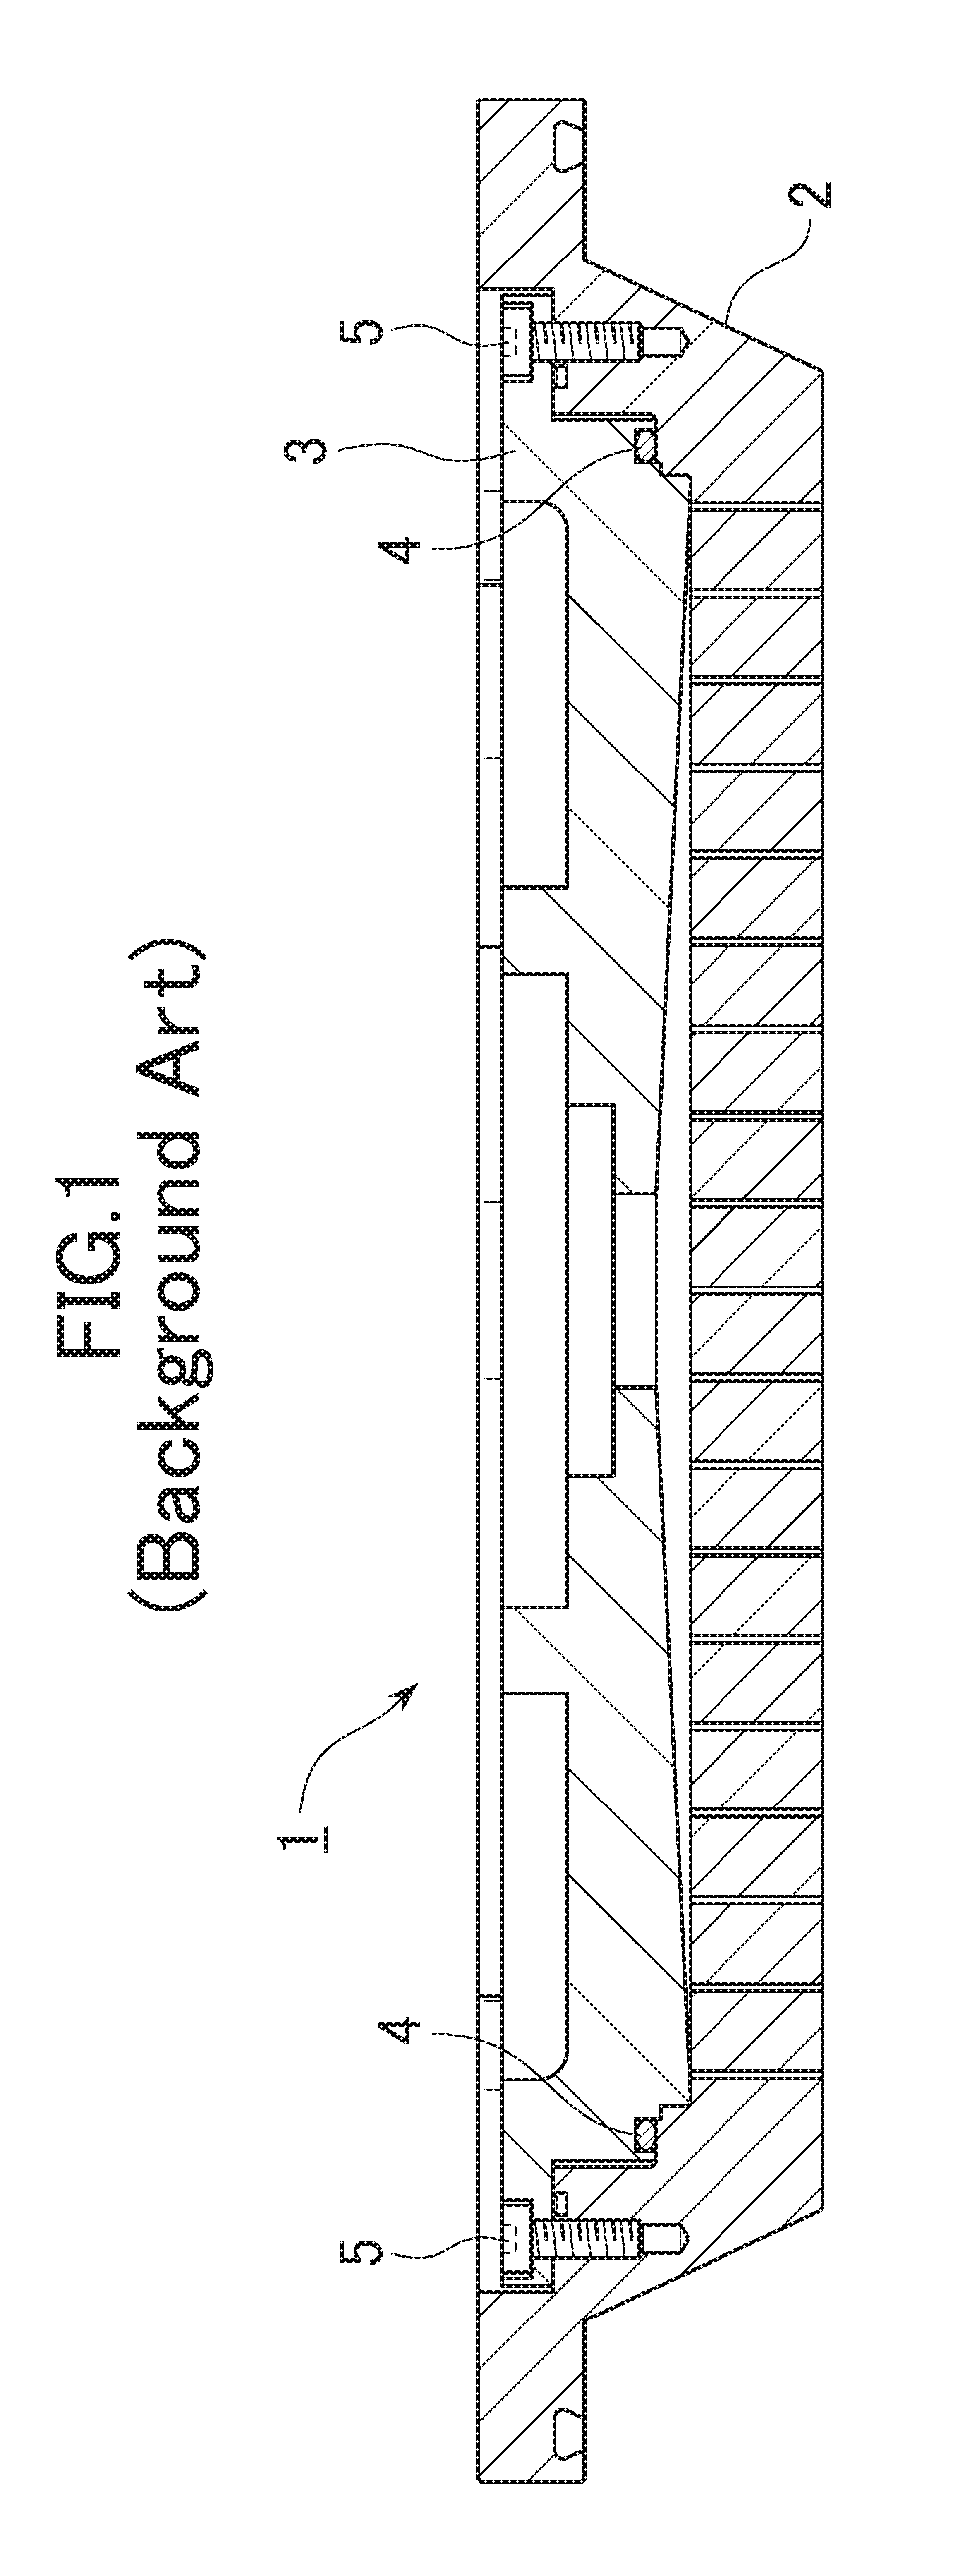 Shower plate structure for exhausting deposition inhibiting gas